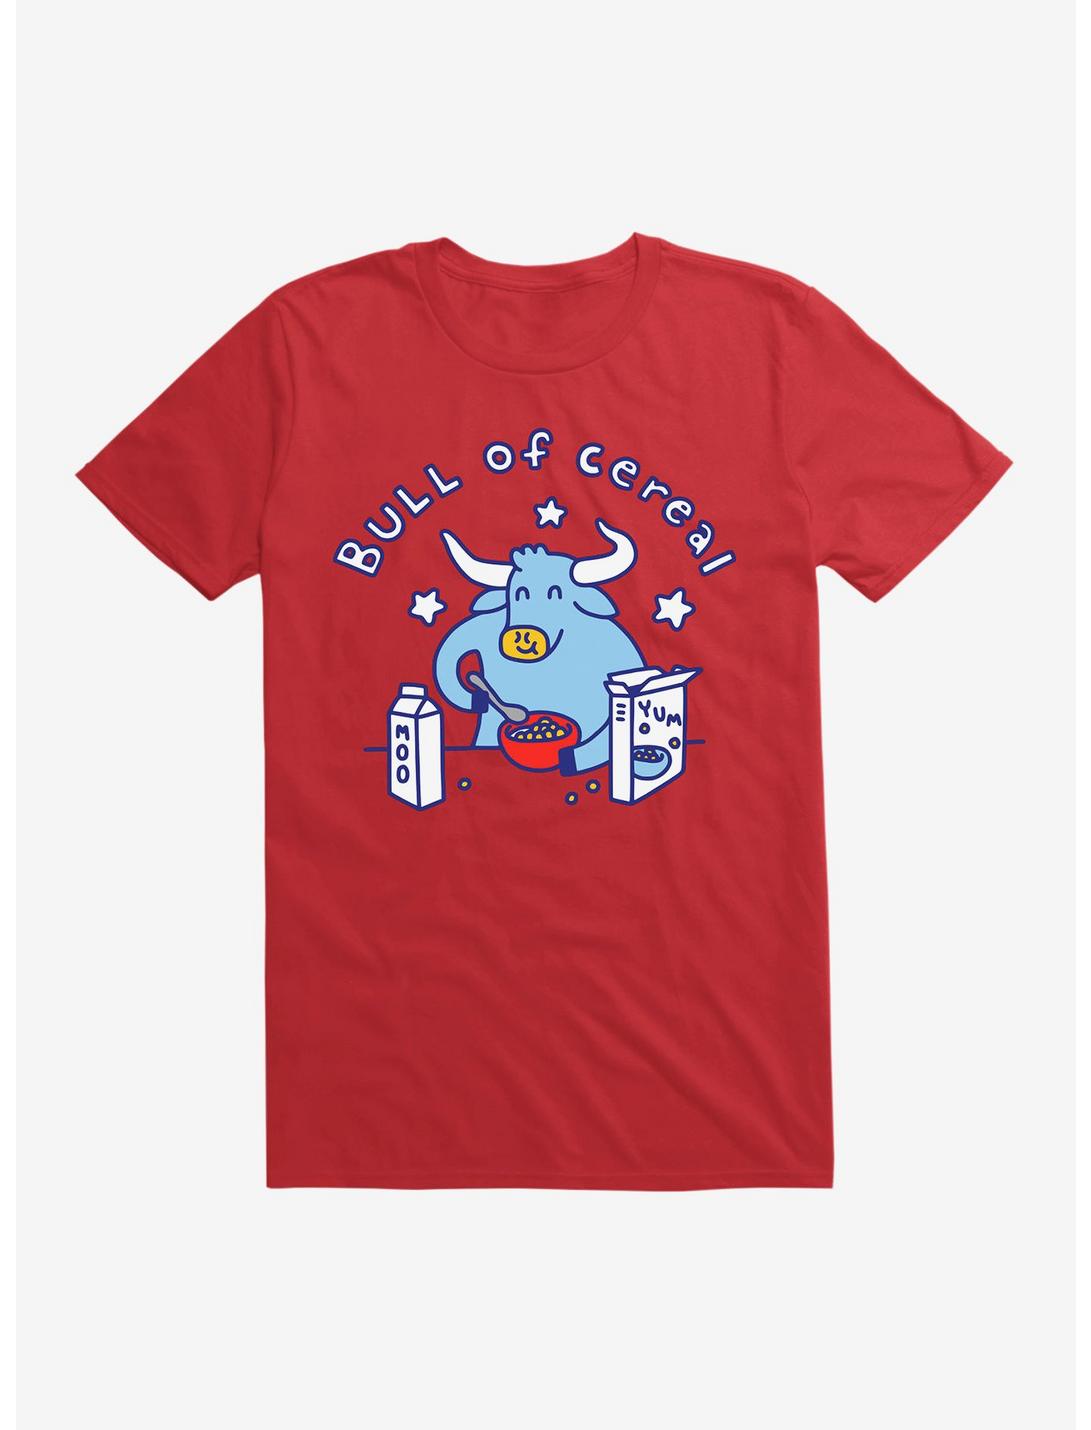 Bull Of Cereal T-Shirt, RED, hi-res